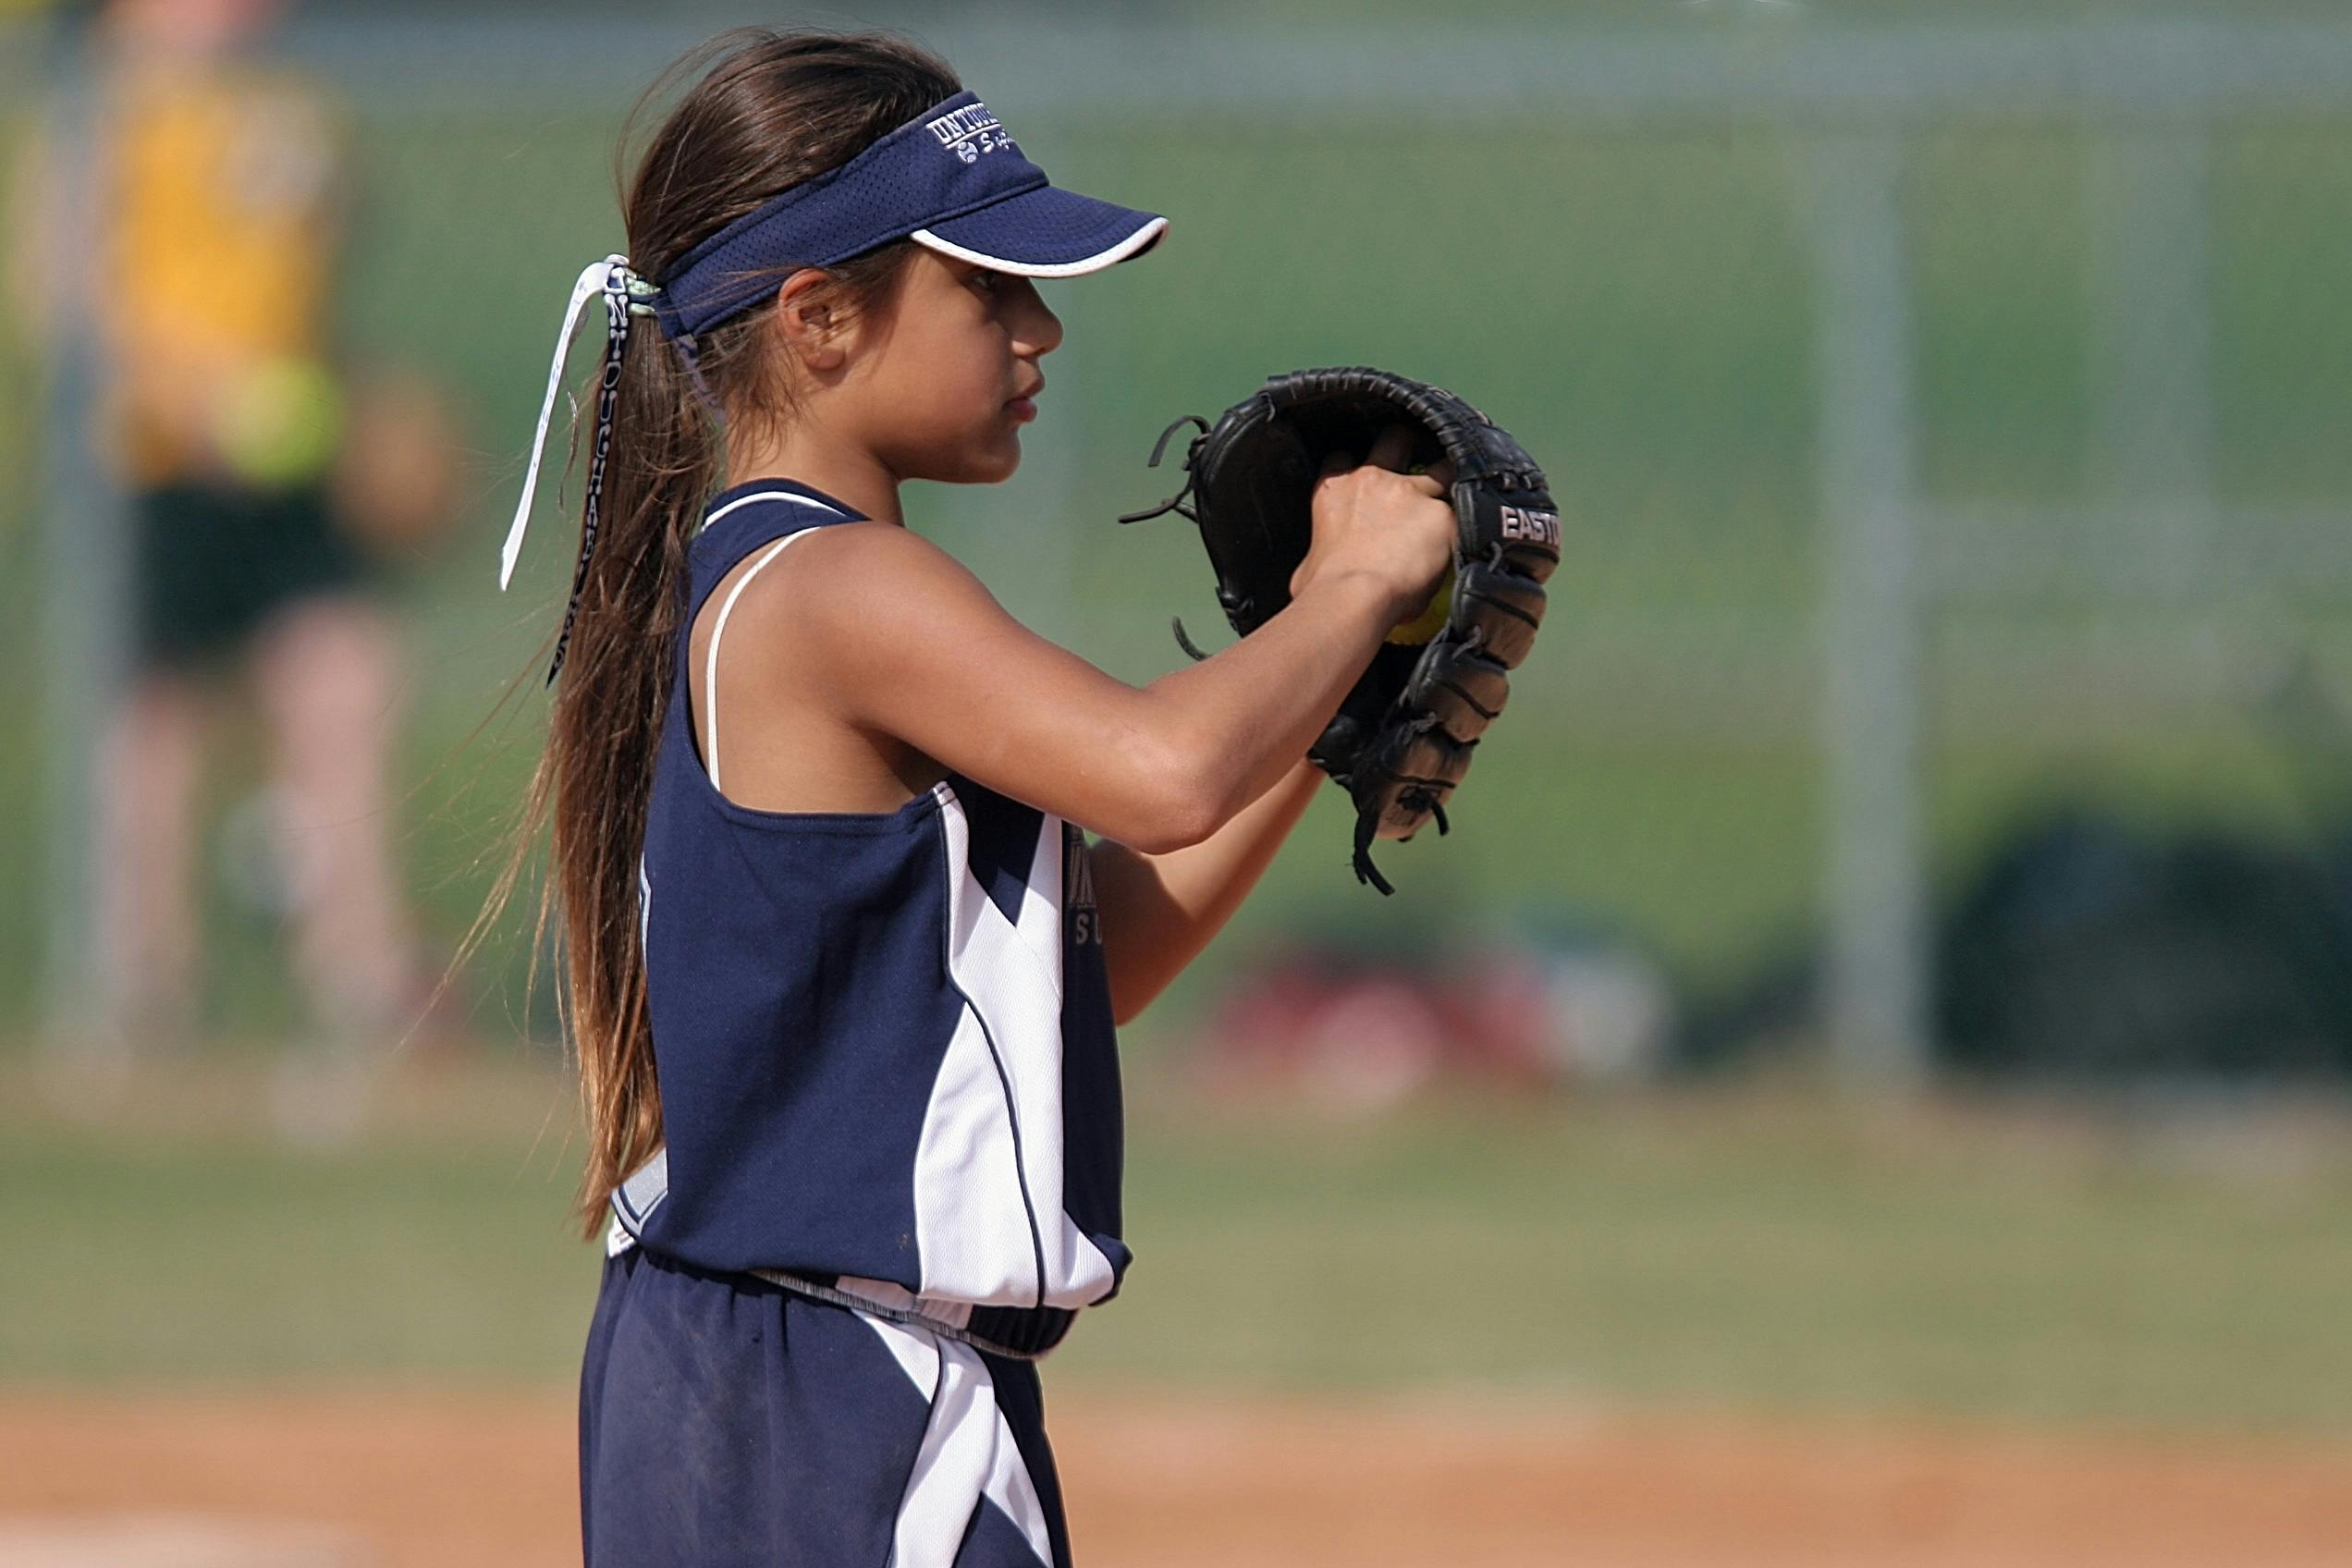 girl getting ready to pitch a baseball